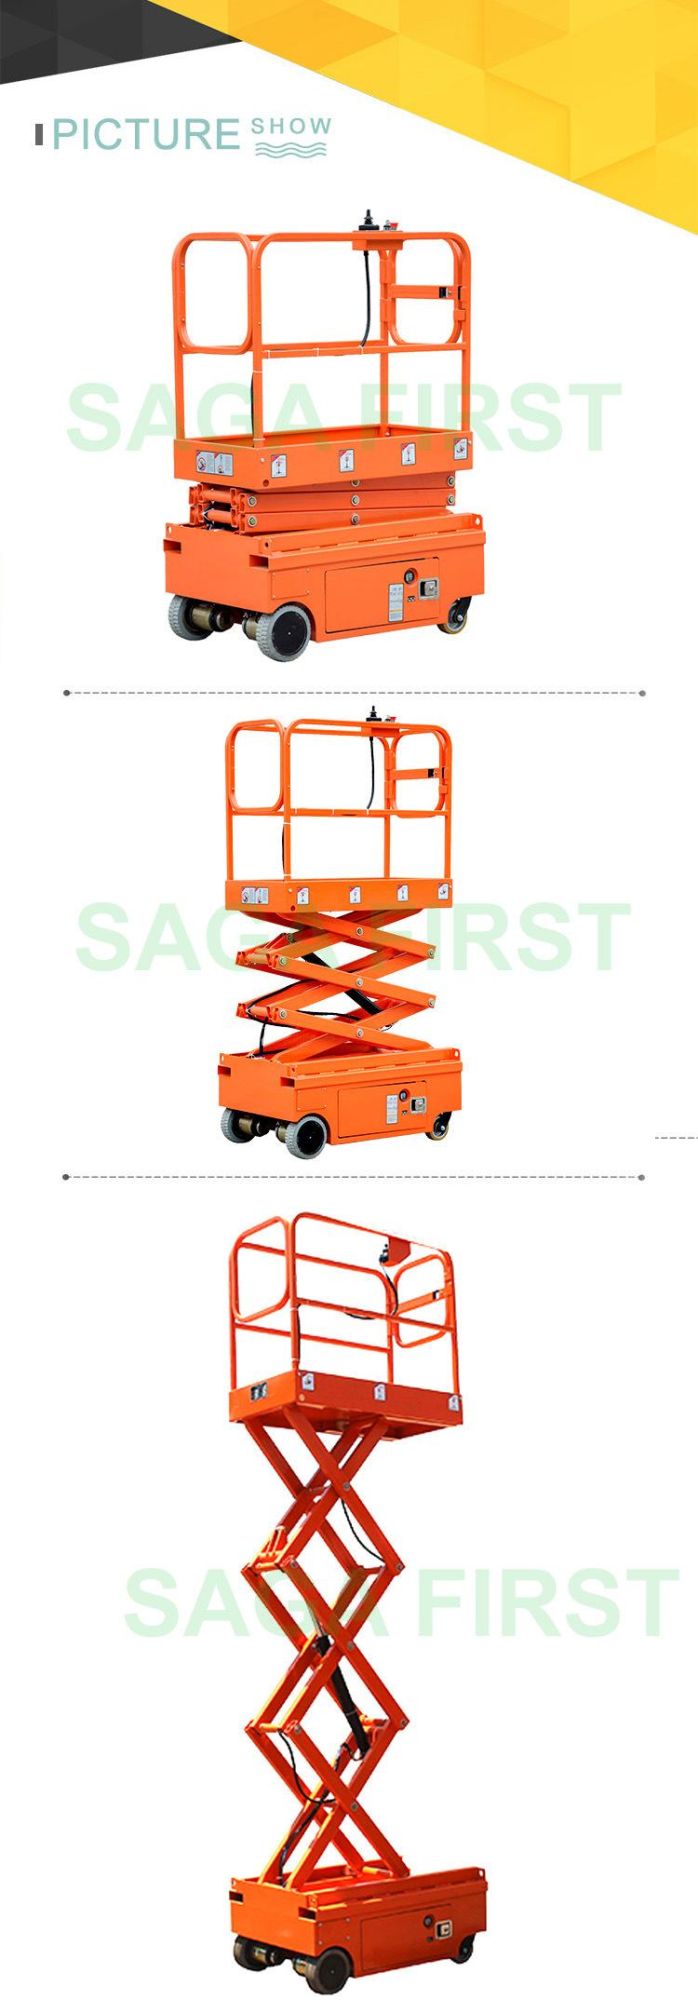 Ce Certified Electric Self Propelled Portable Scissor Lift